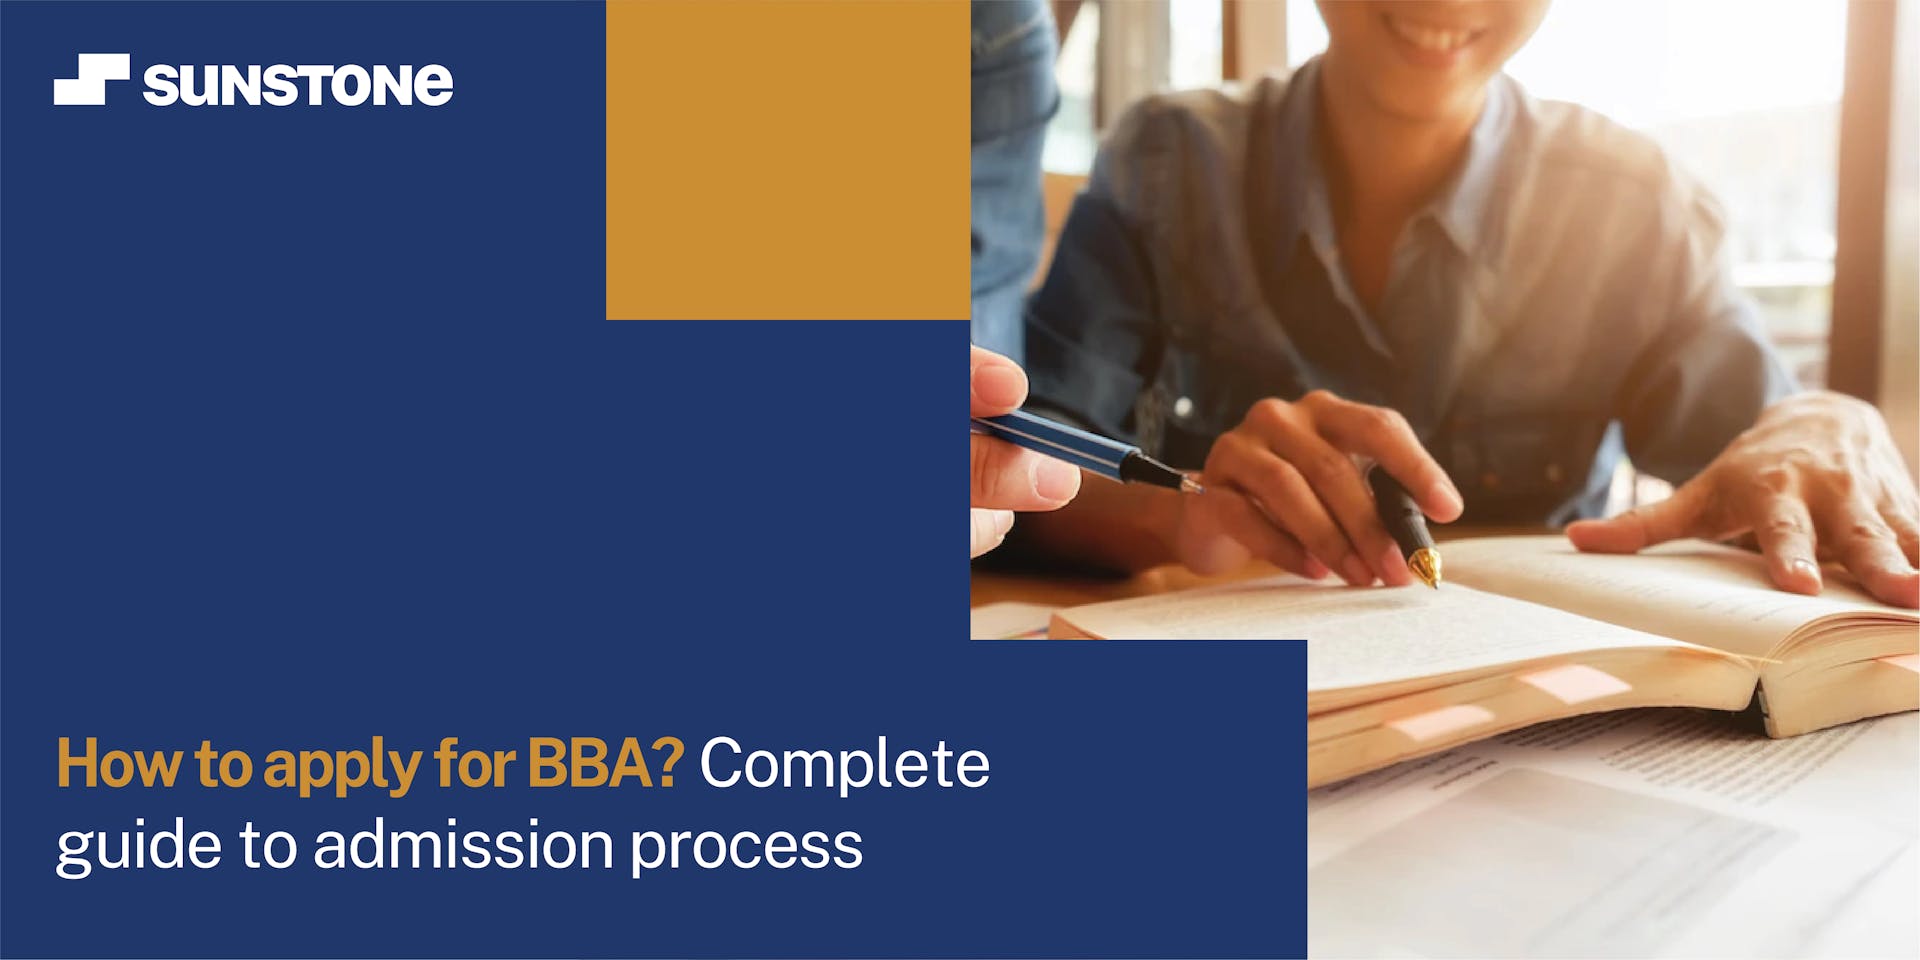 How to Apply for BBA? Complete Guide to Admission Process